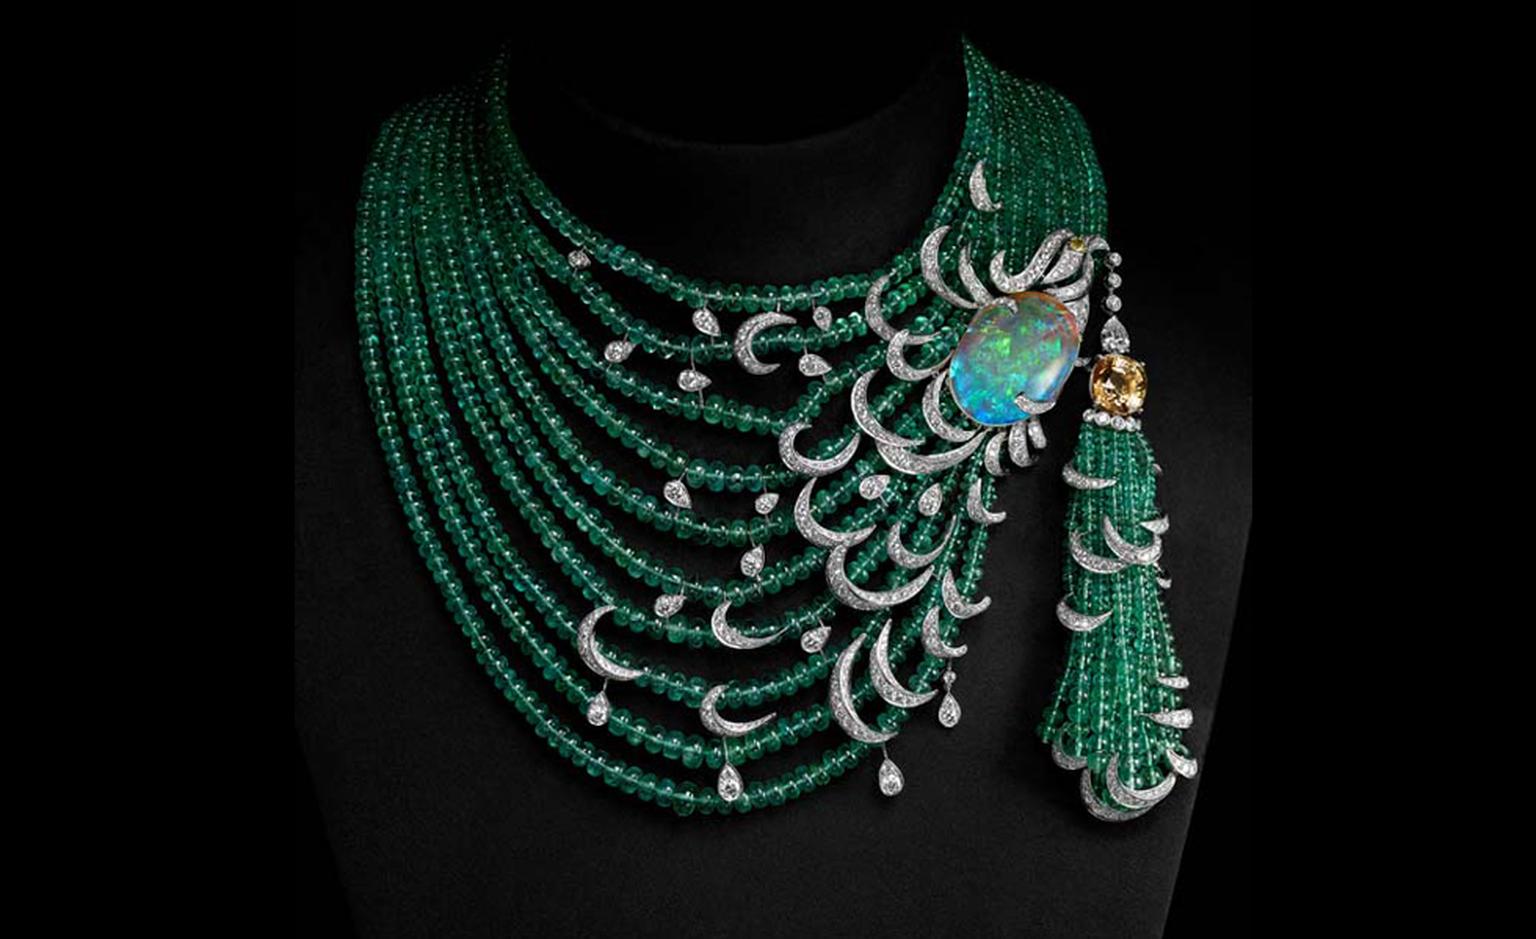 CARTIER. Emerald, opal and diamond necklace with yellow diamond solitaire. POA